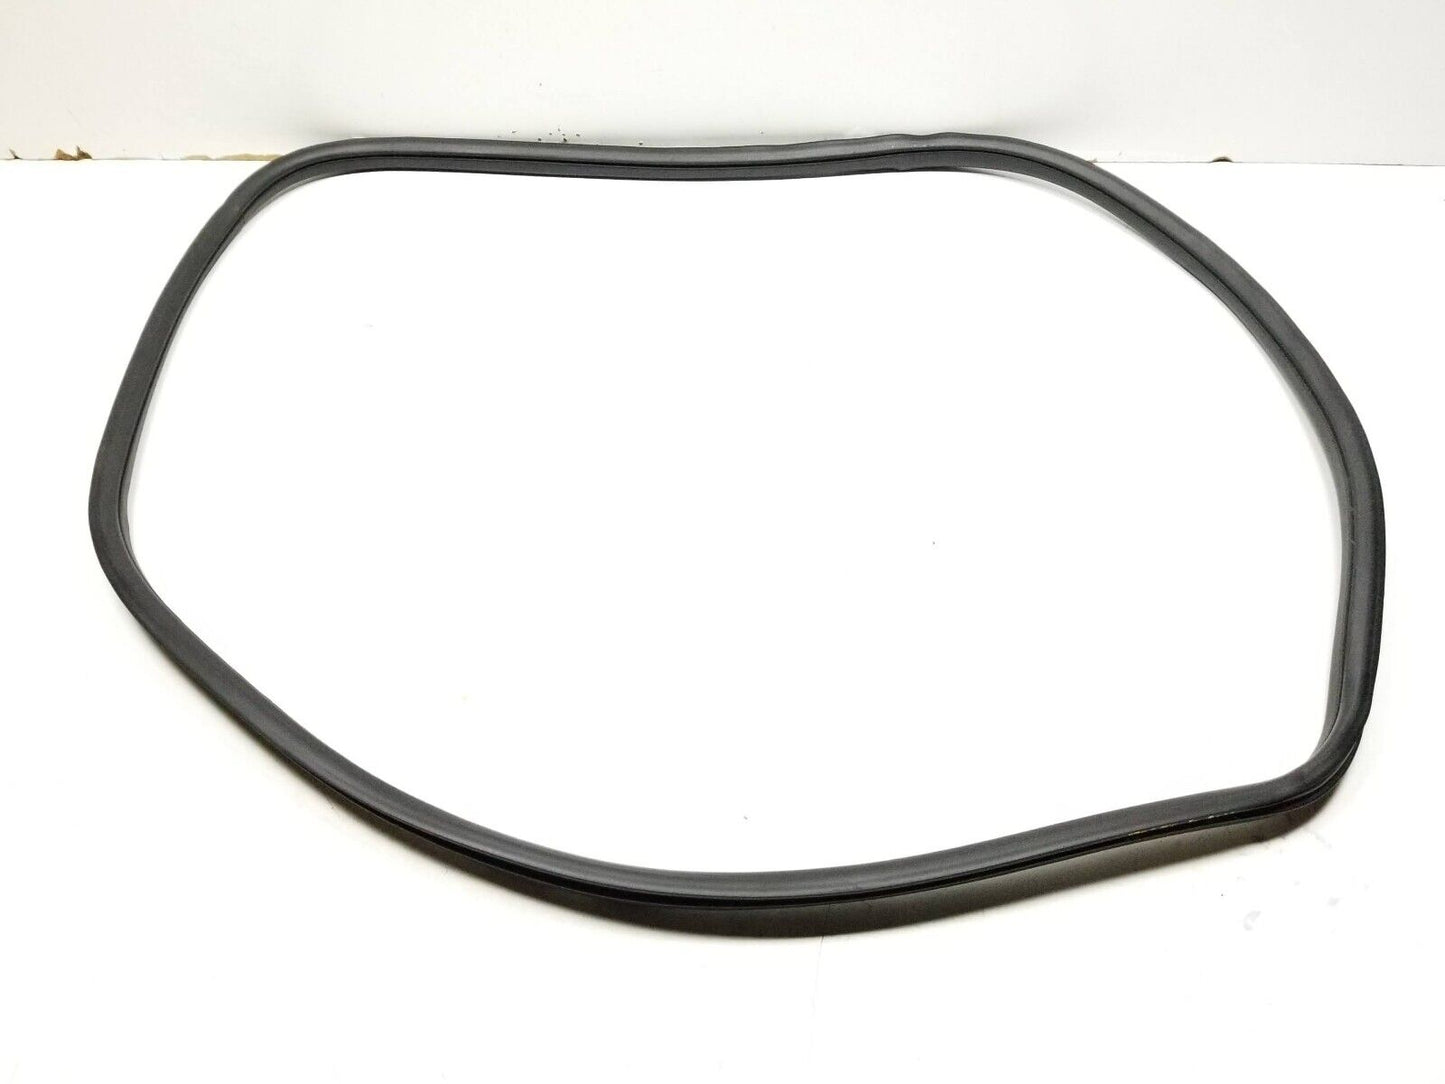 2013 - 2018 Cadillac Ats Front Door Weather Strip Seal Passenger Side Right OEM